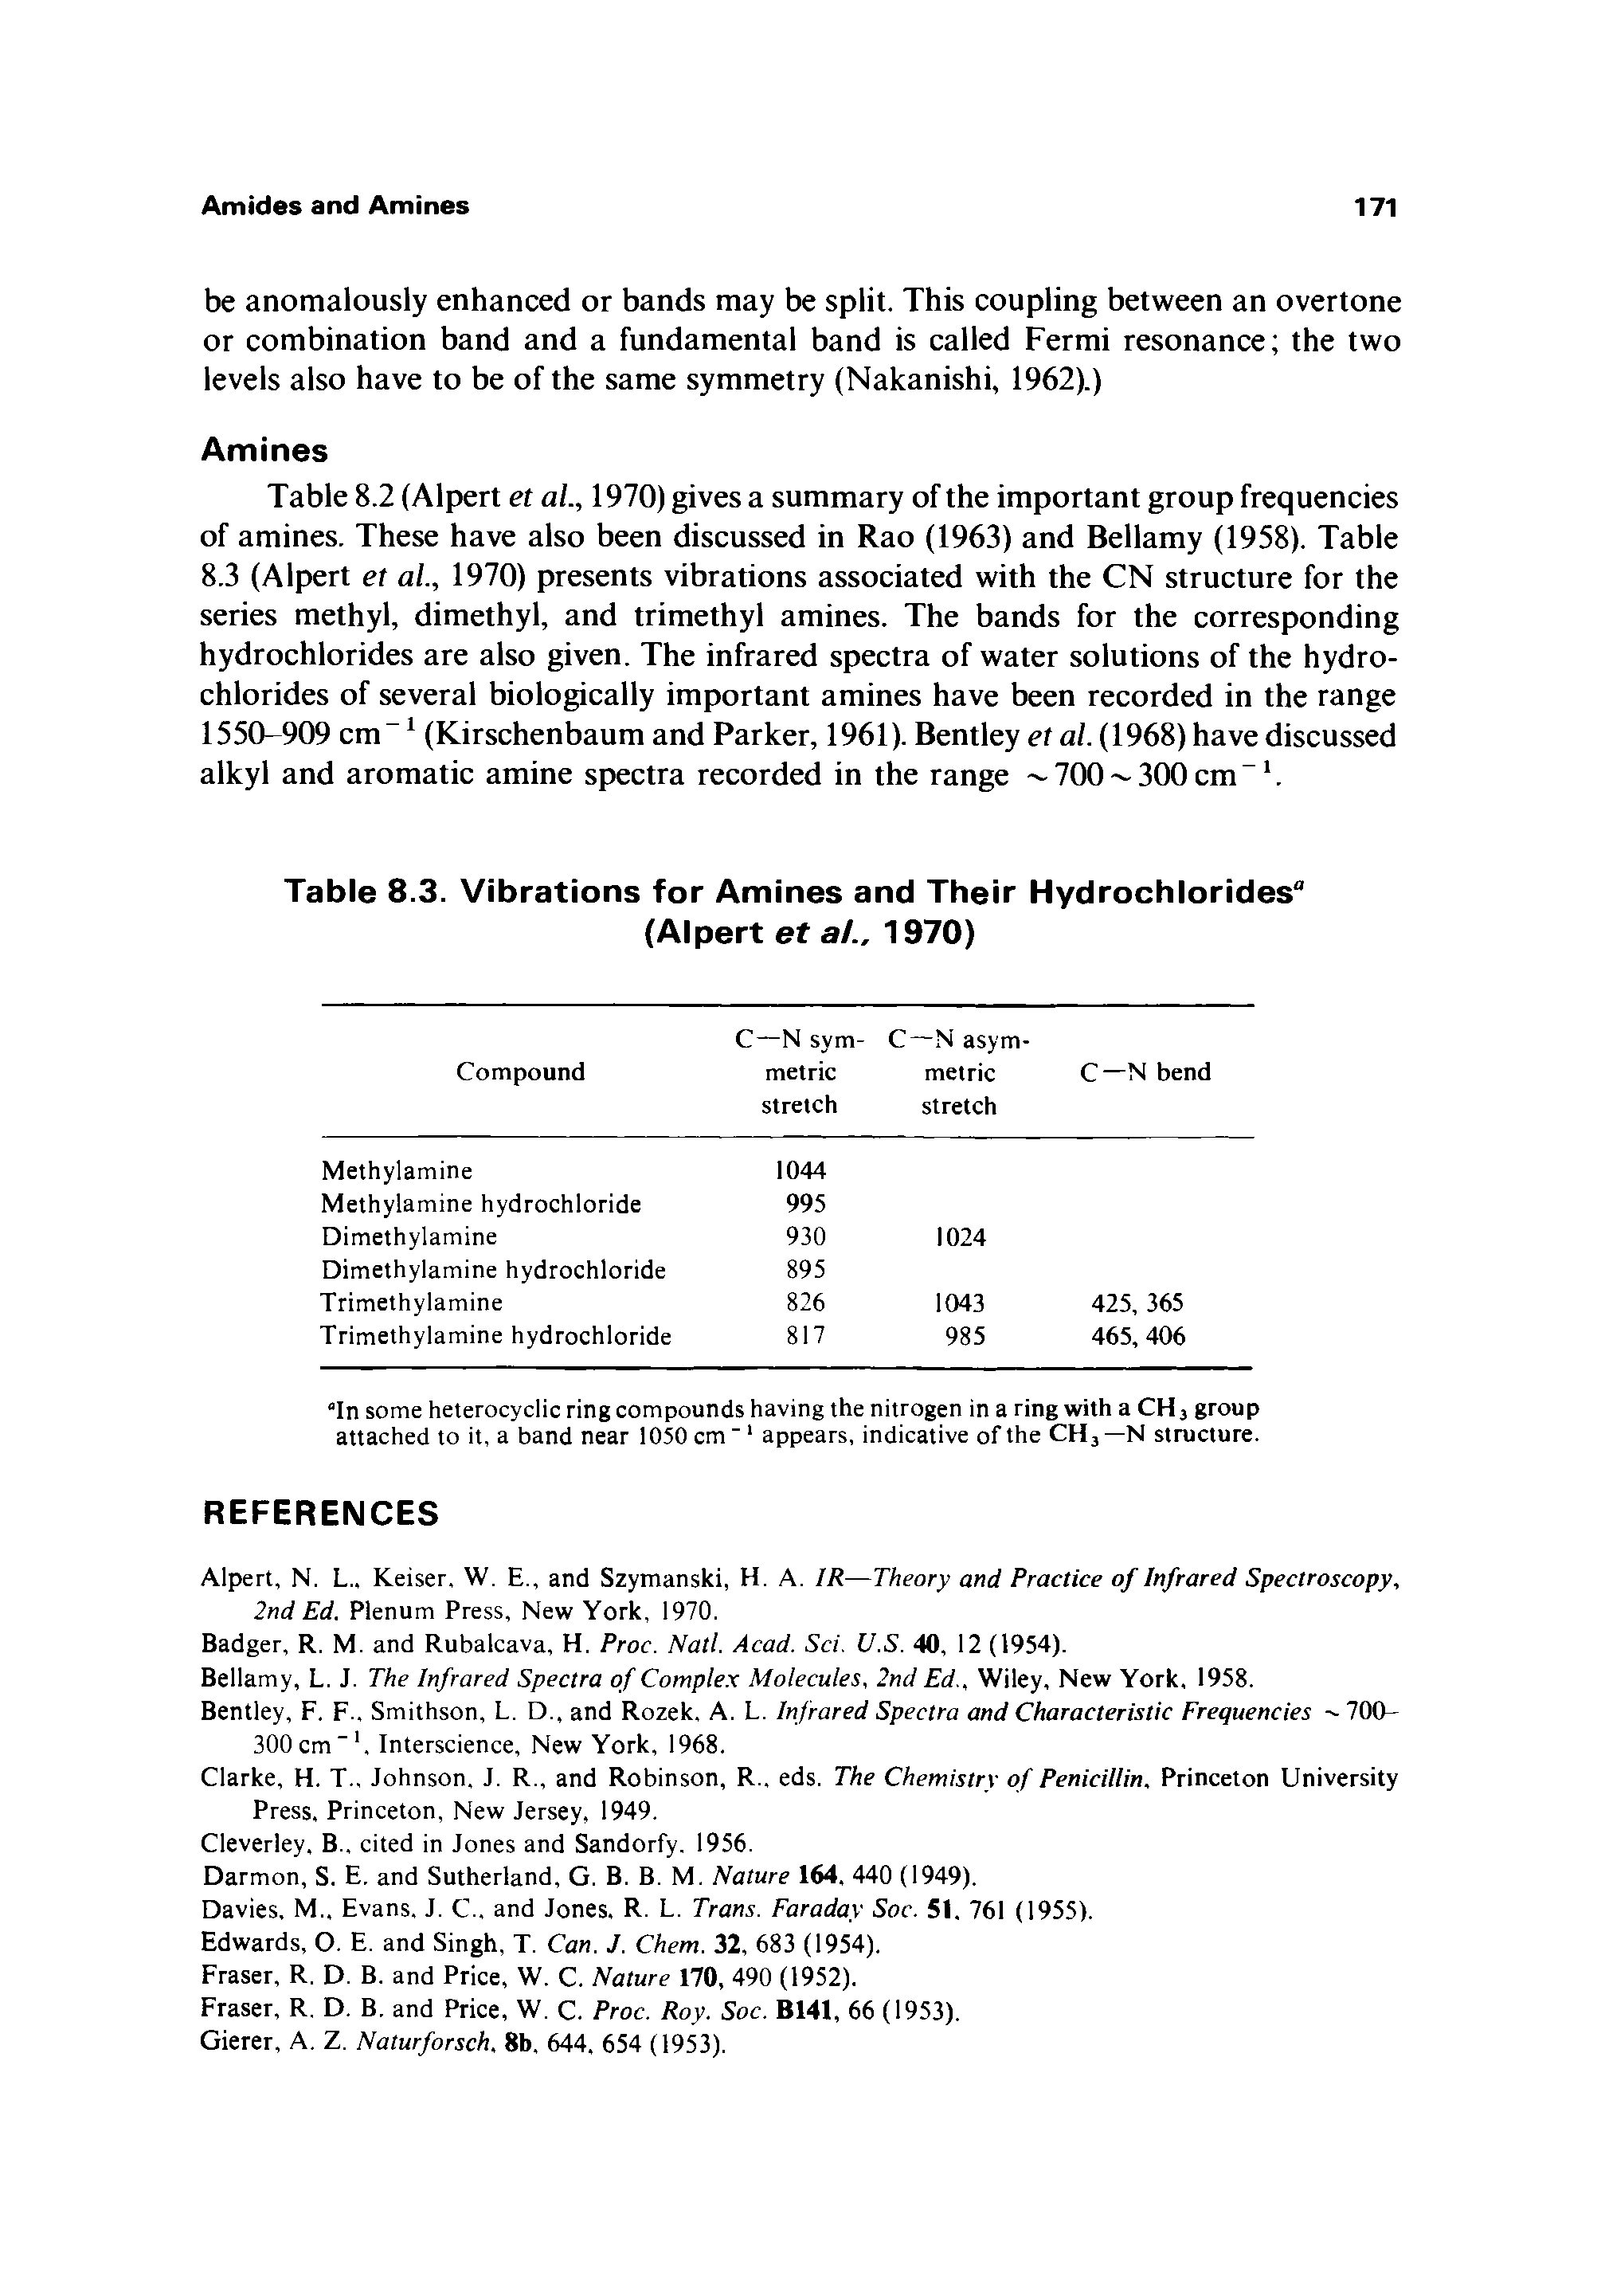 Table 8.2 (Alpert et al., 1970) gives a summary of the important group frequencies of amines. These have also been discussed in Rao (1963) and Bellamy (1958). Table 8.3 (Alpert et al, 1970) presents vibrations associated with the CN structure for the series methyl, dimethyl, and trimethyl amines. The bands for the corresponding hydrochlorides are also given. The infrared spectra of water solutions of the hydrochlorides of several biologically important amines have been recorded in the range 1550-909 cm (Kirschenbaum and Parker, 1961). Bentley et al. (1968) have discussed alkyl and aromatic amine spectra recorded in the range 700 300cm V...